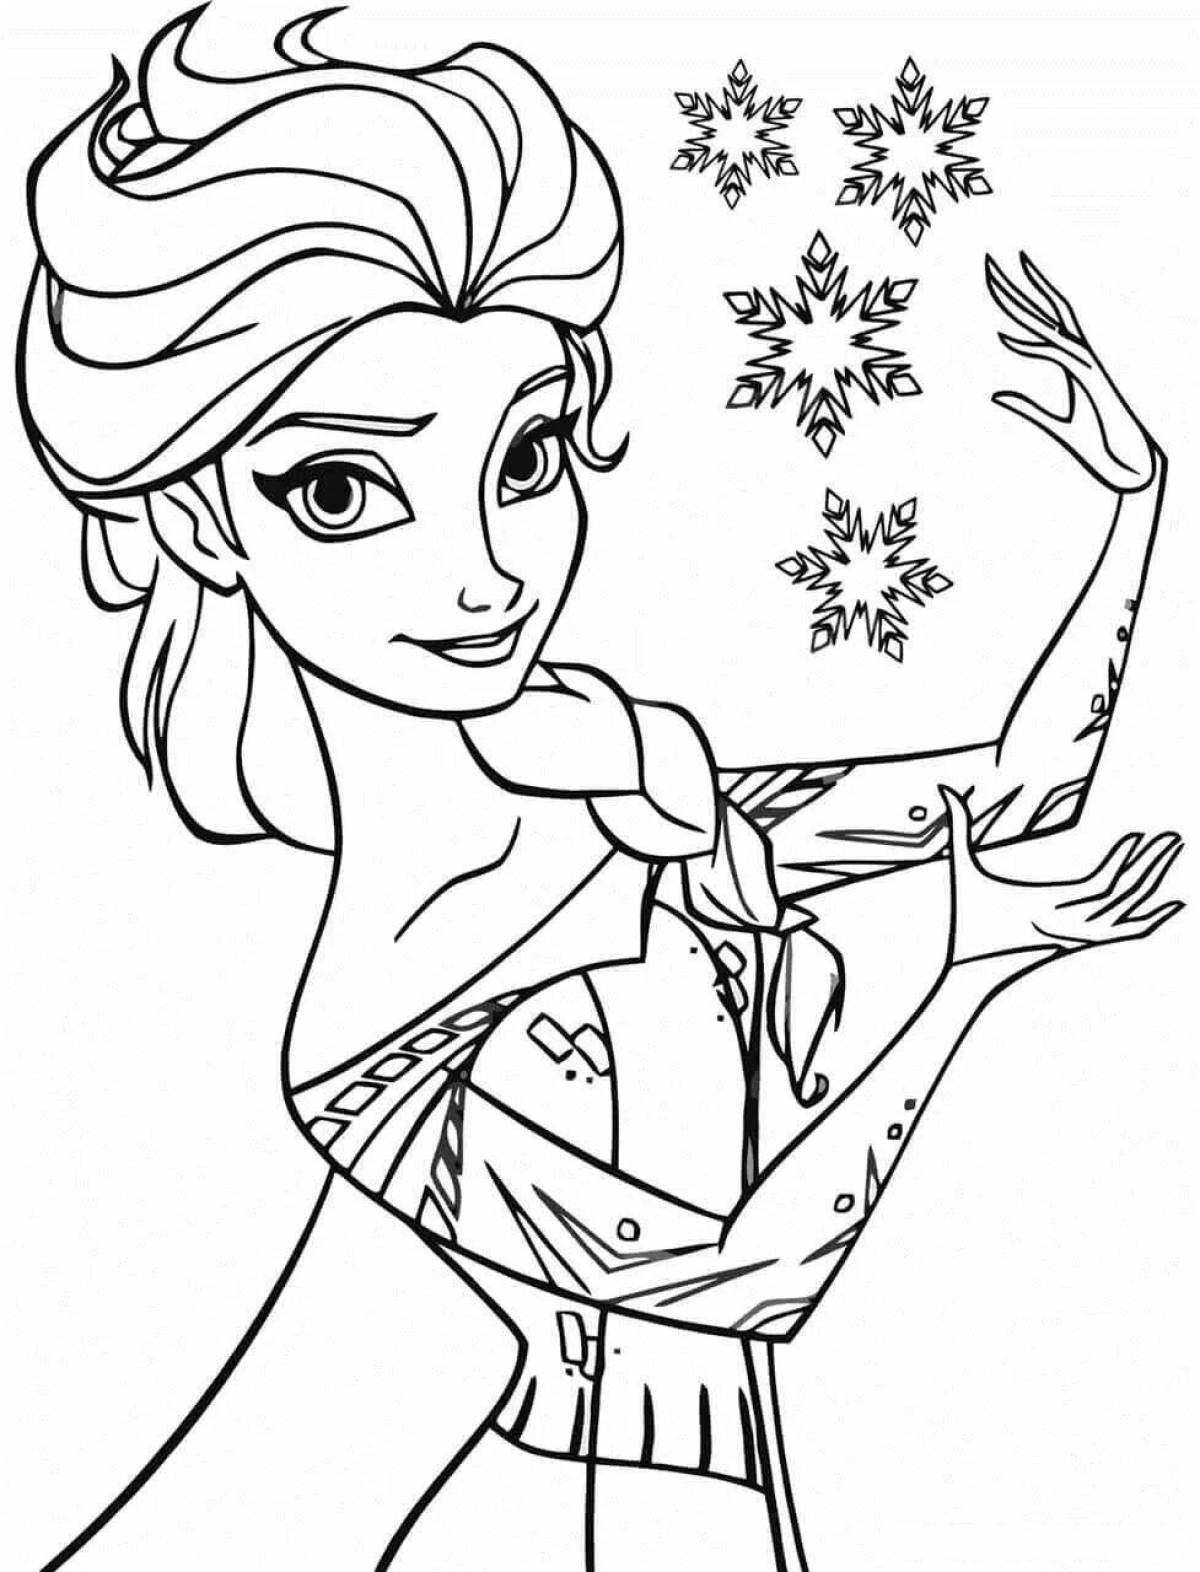 Cold heart large coloring book for 6-7 year olds